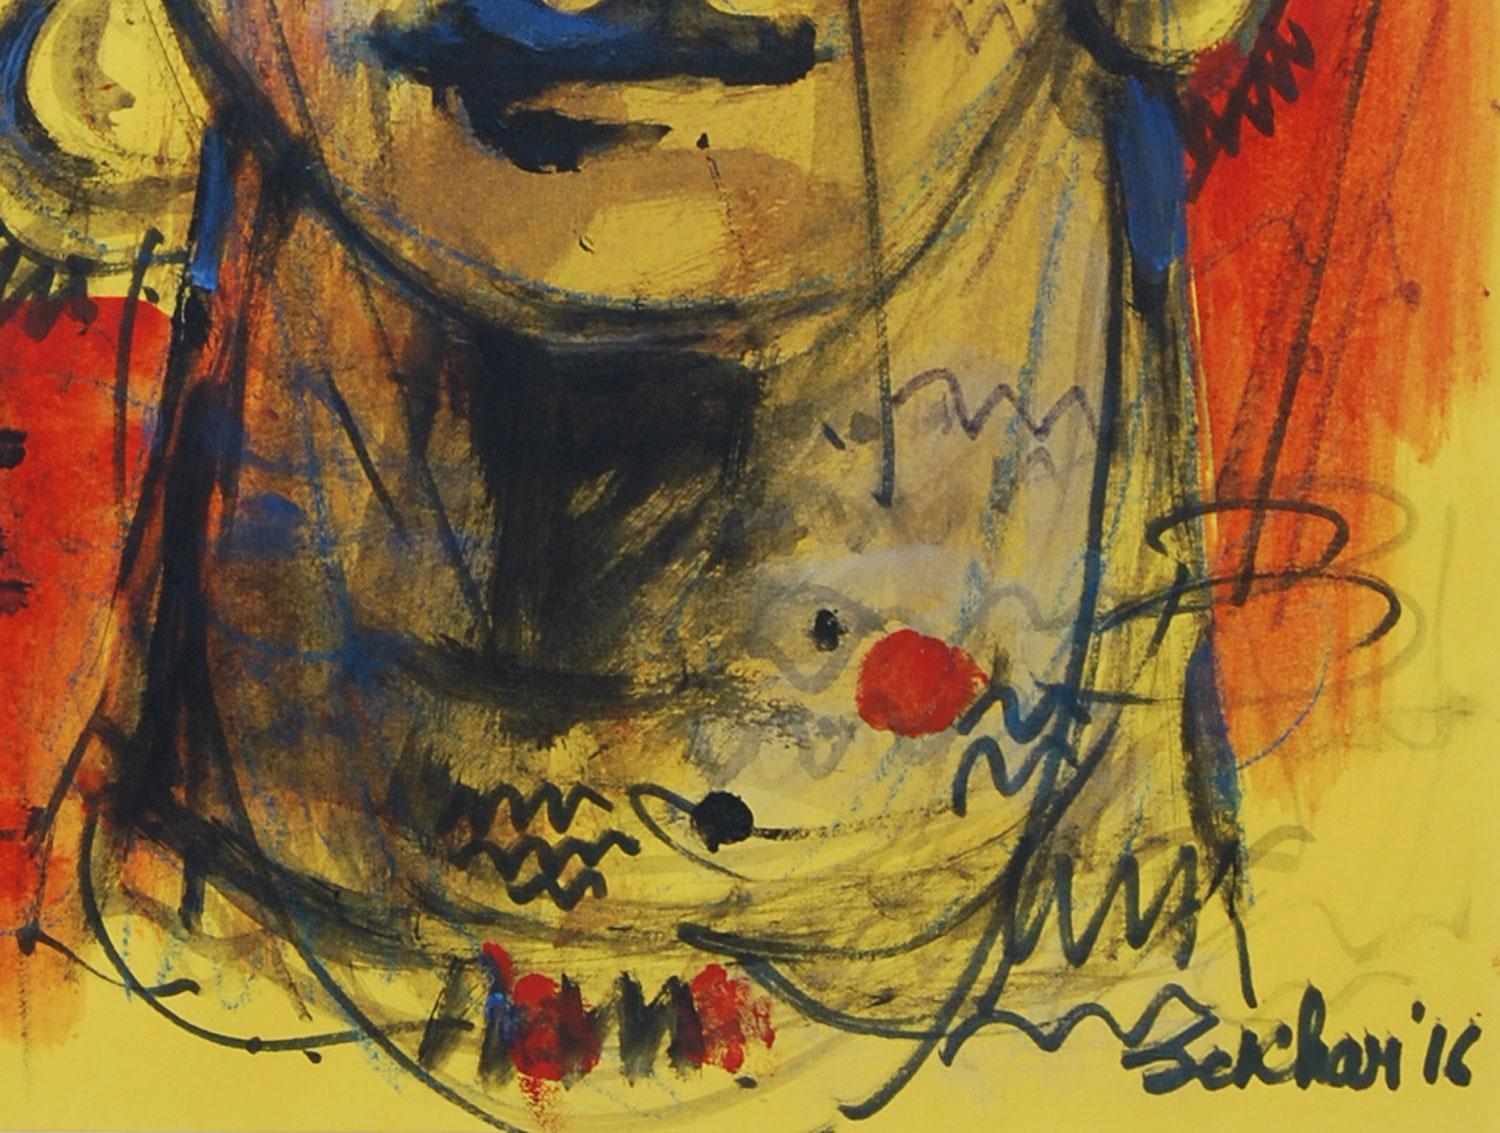 Man & Woman, Faces, Mixed Media, Red, Blue, Brown by Indian Artist 